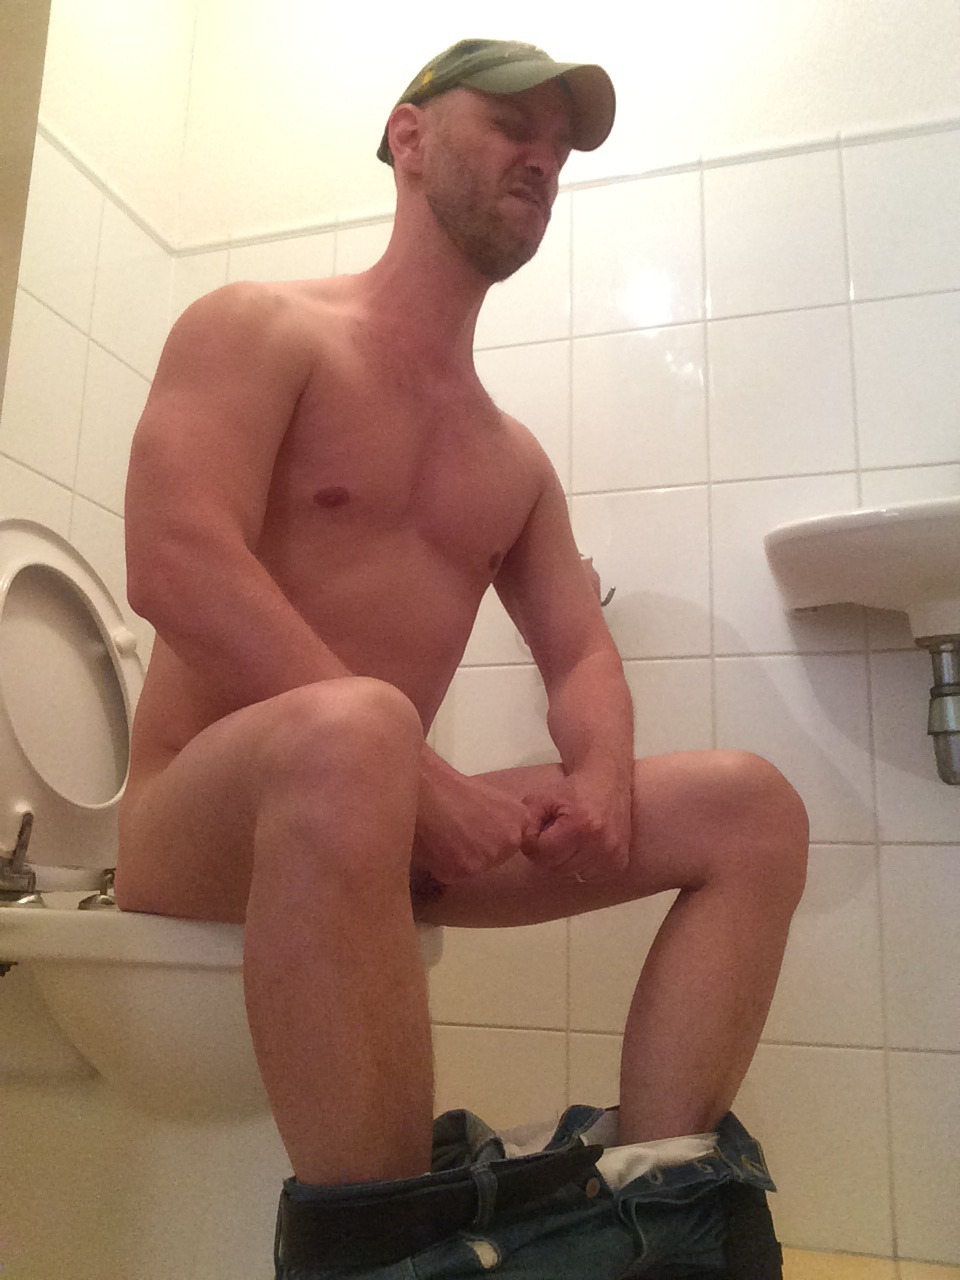 beuker71:  Taking a dump.   This guy is to fucking hot!!!!